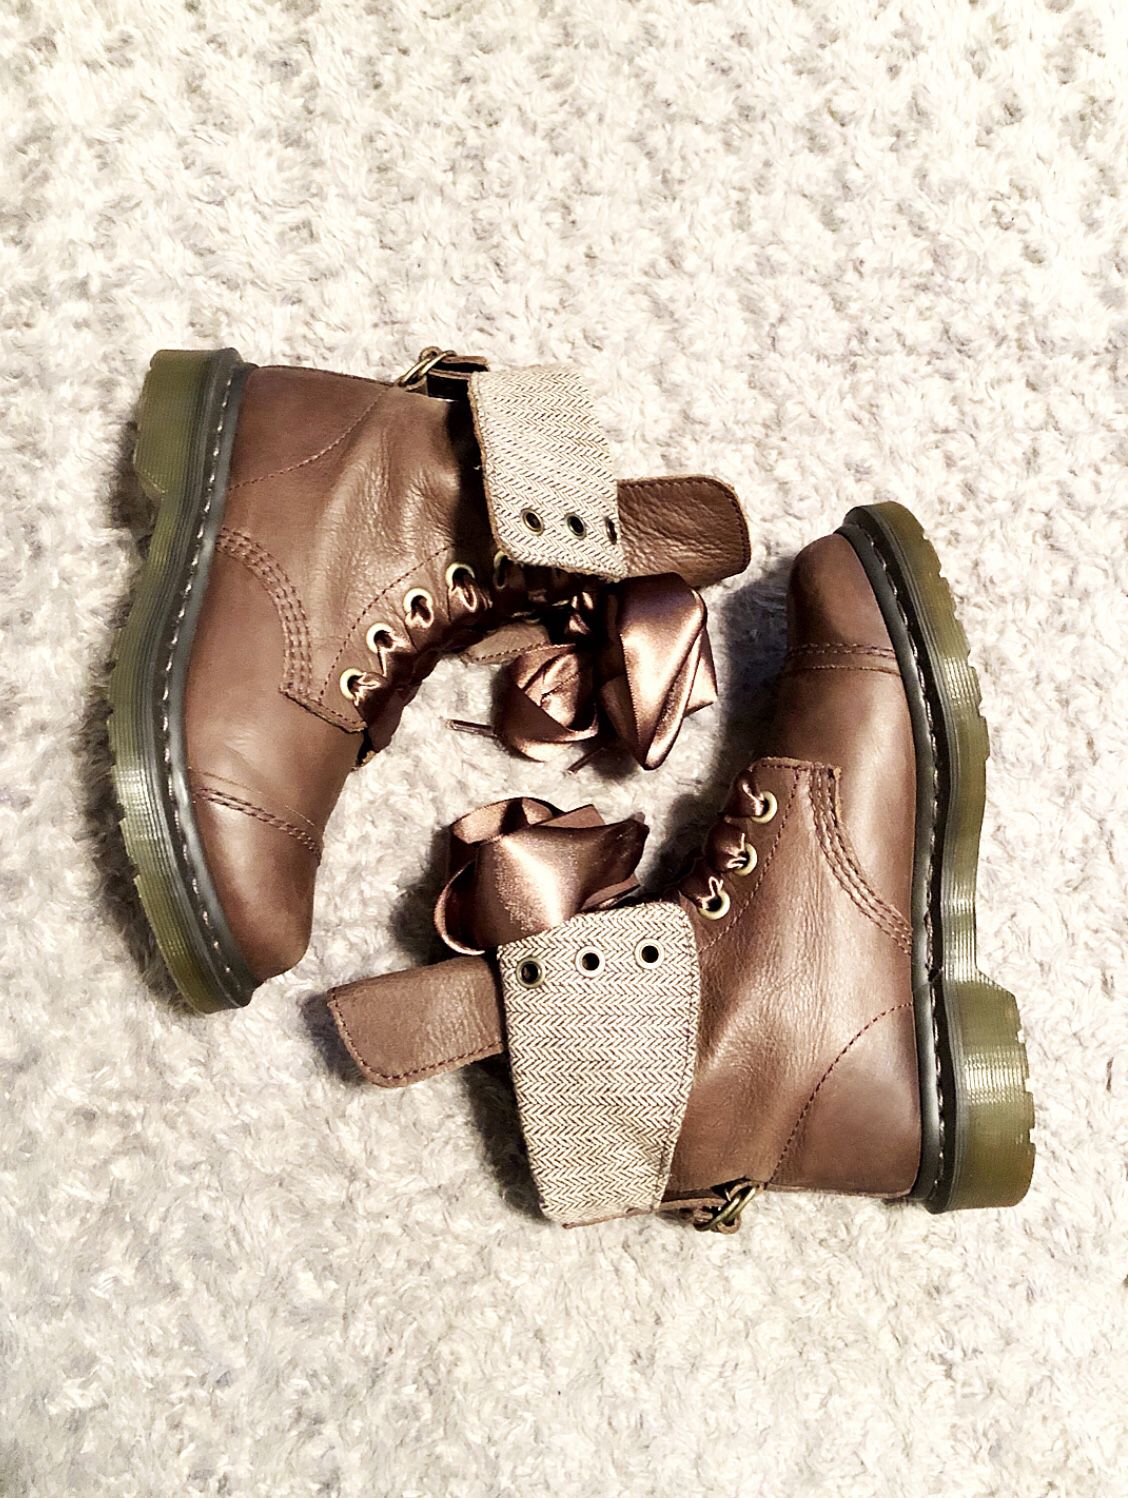 Women’s Dr. Martens boots paid $175 size 7 great condition. The style “Aimilita” Combat Boot color Dark Brown only worn once. Can be worn folded down